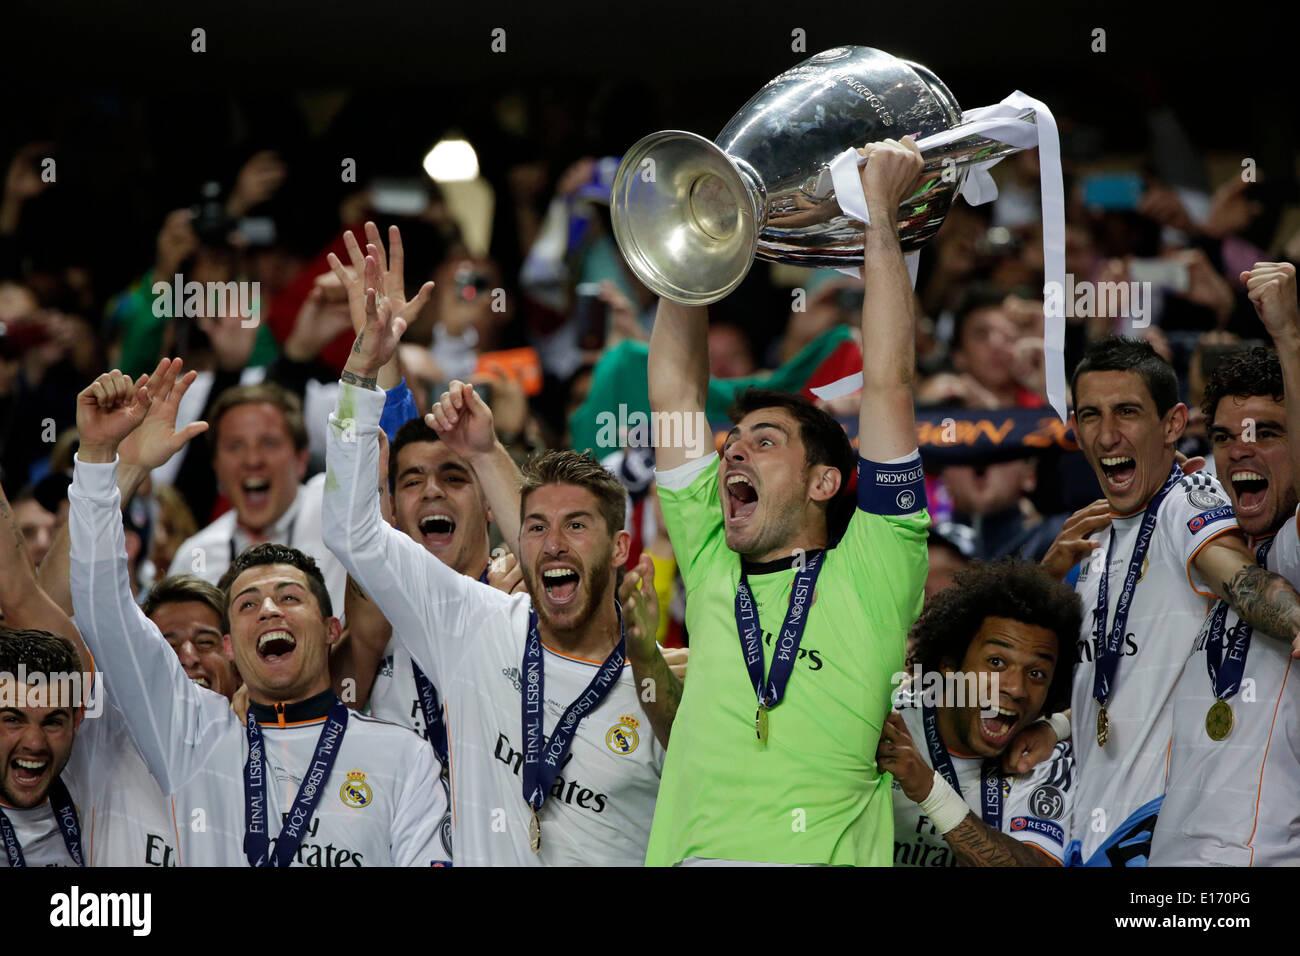 Lisbon, Portugal. 24th May, 2014. CRISTIANO RONALDO, SERGIO RAMOS, IKER CASILLAS, MARCELO, DI MARIA and PEPE with the cup after beating Atletico de Madrid in the UEFA Champions League at Benfica's stadium. Credit:  Bruno Colaco/ZUMAPRESS.com/Alamy Live News Stock Photo